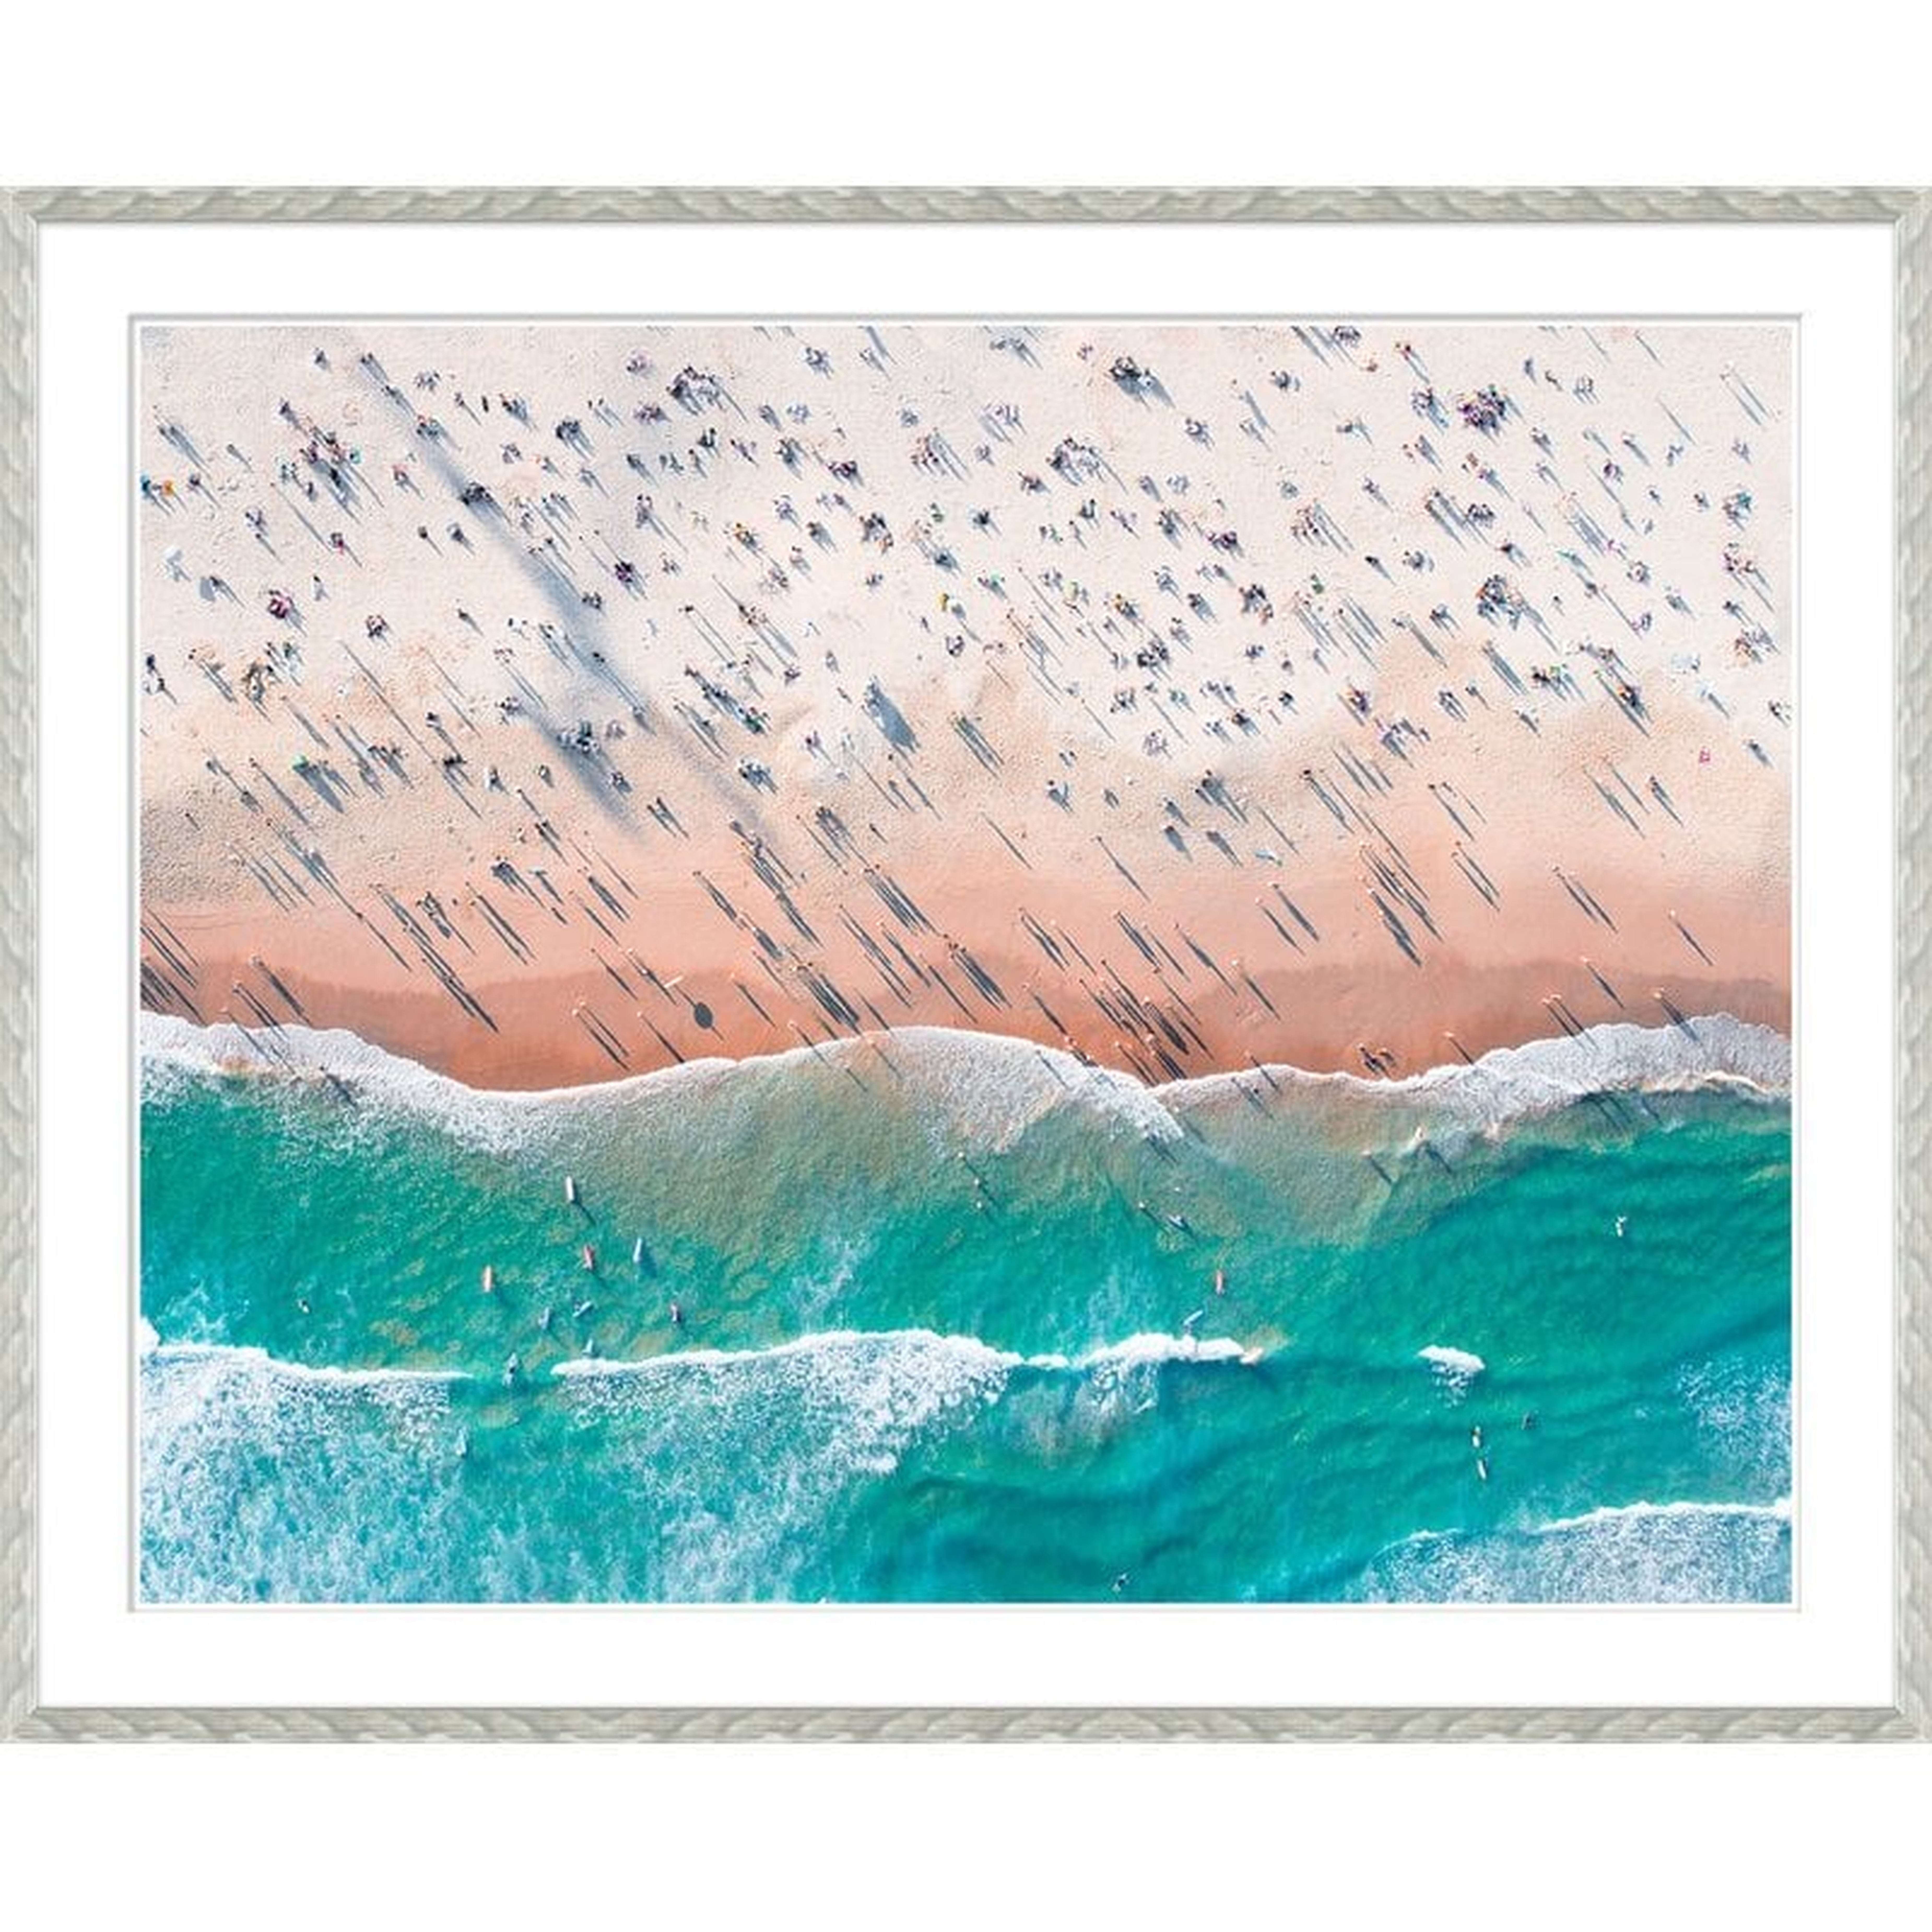 'DAY AT THE BEACH' FRAMED GRAPHIC ART PRINT - Perigold